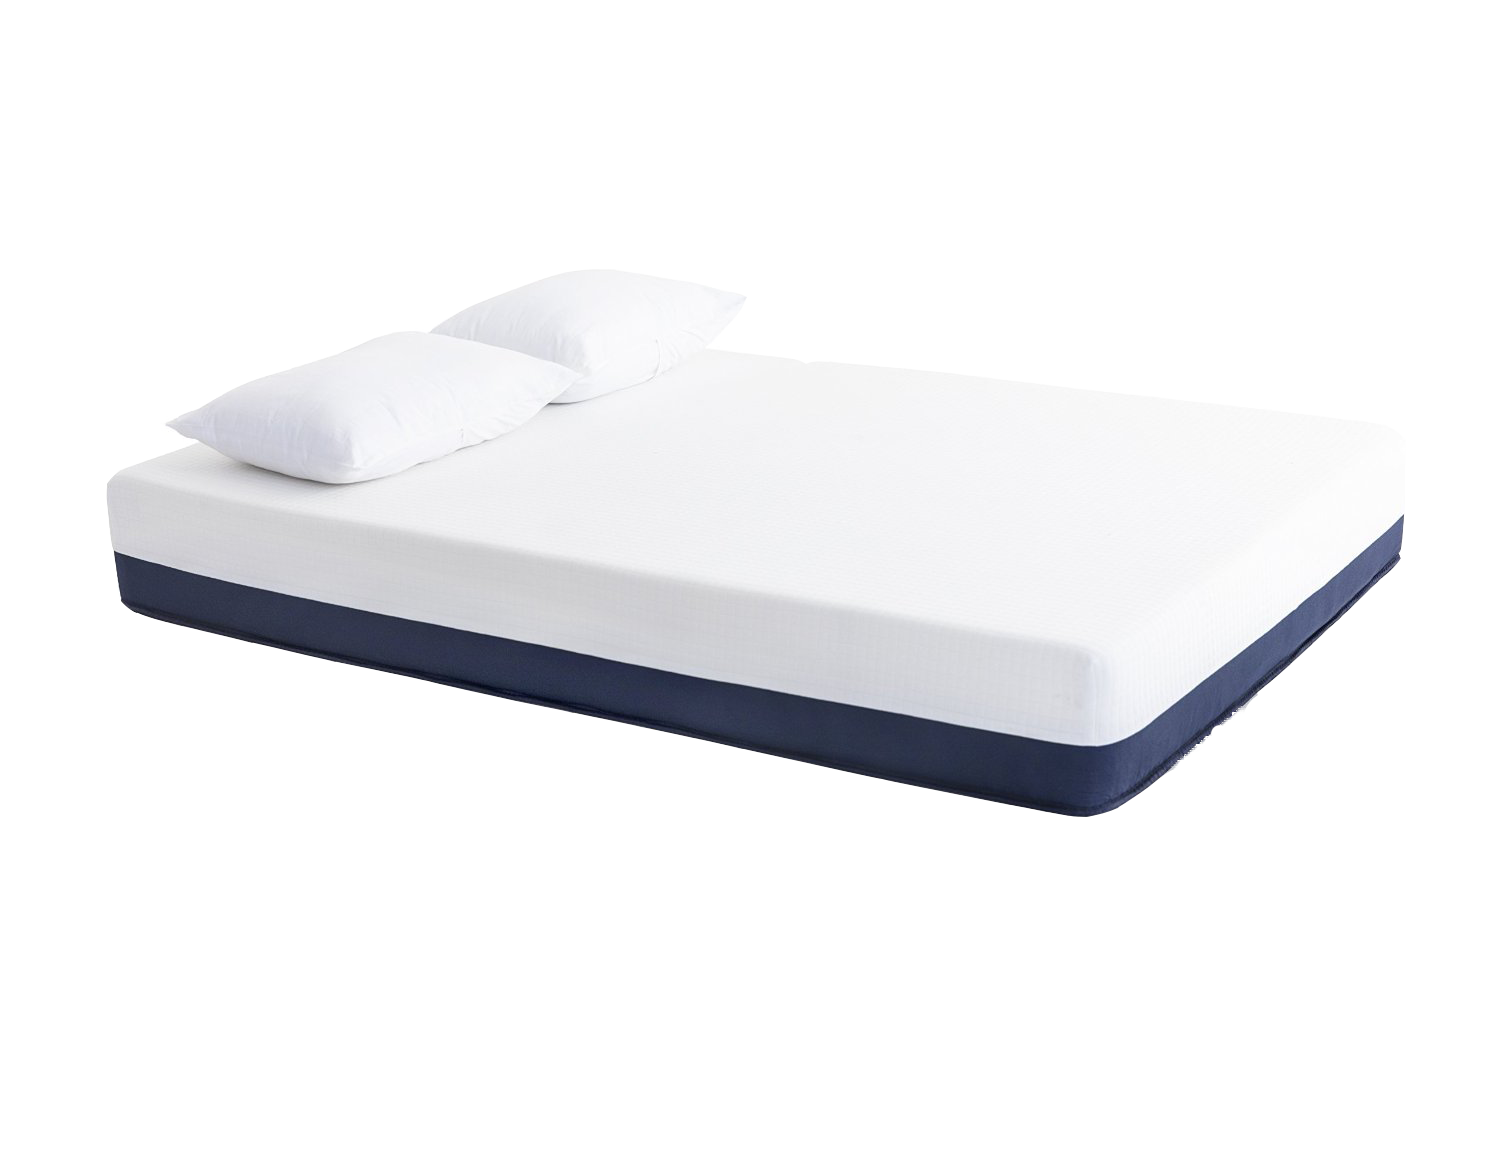 Helix Mattress Review - Does The Customization Work ...